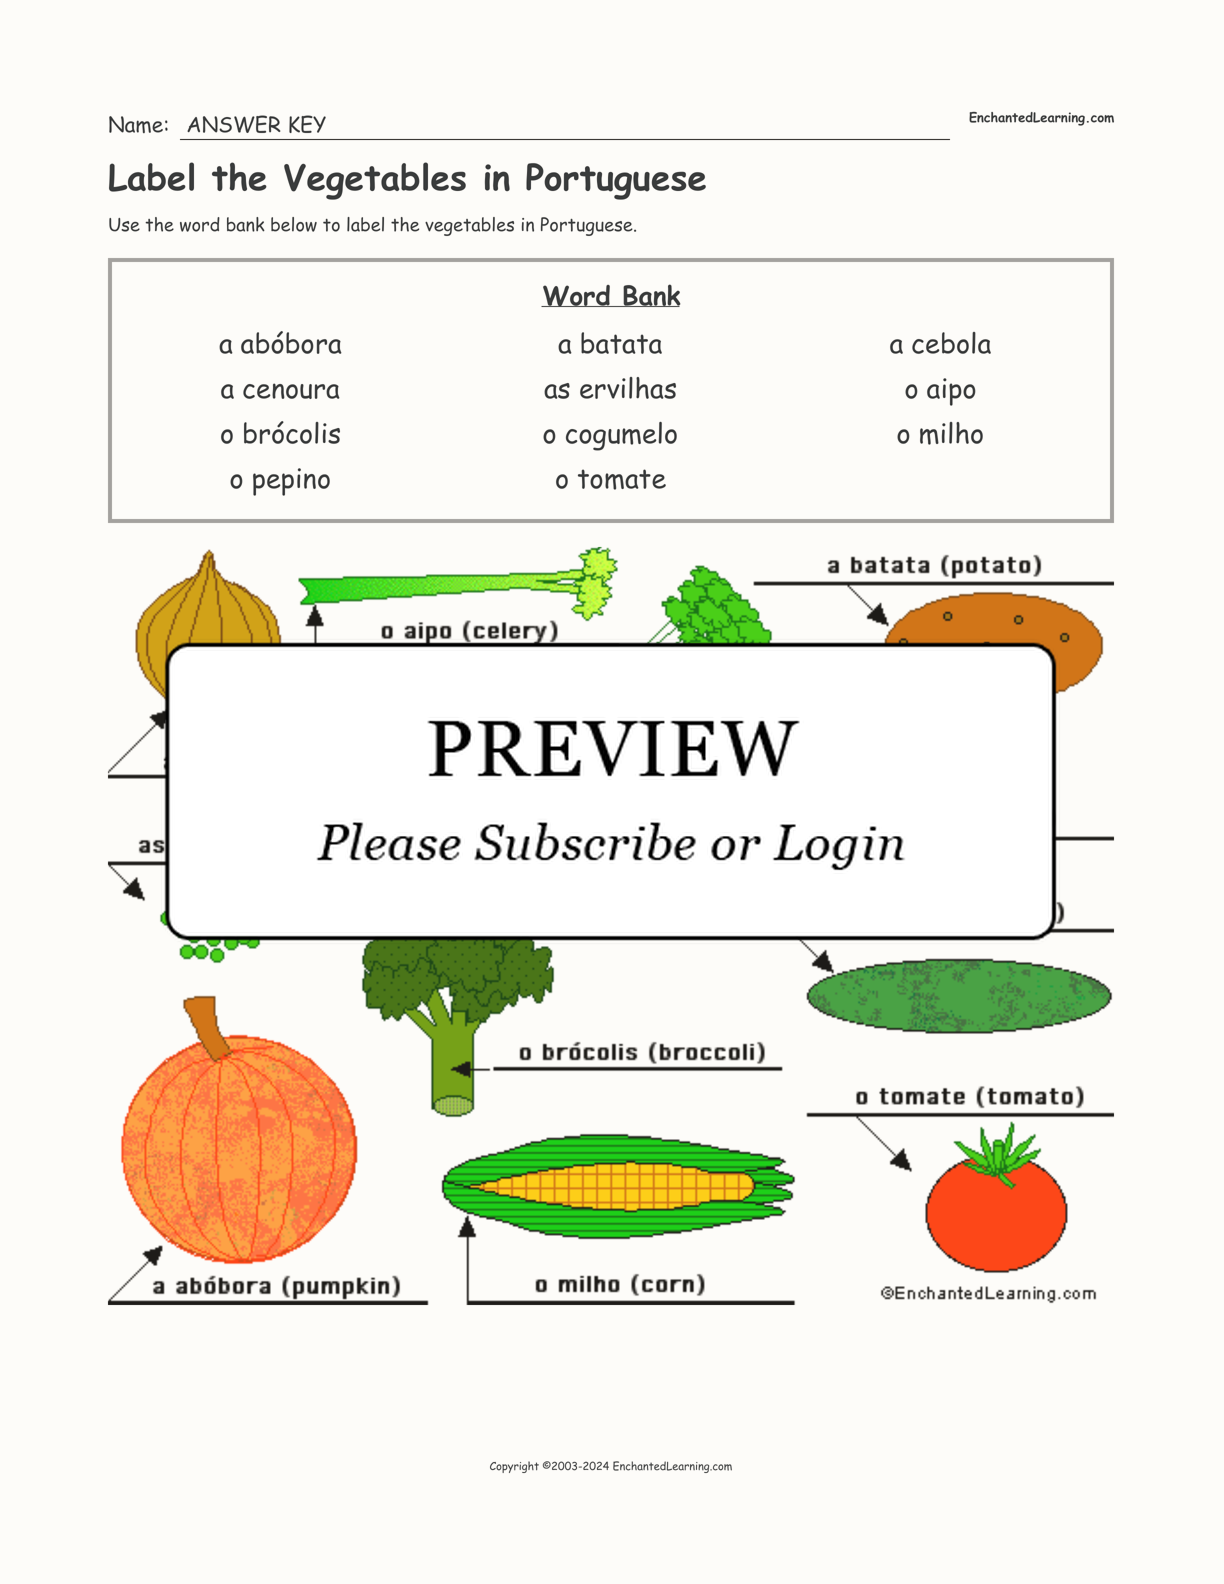 Label the Vegetables in Portuguese interactive worksheet page 2